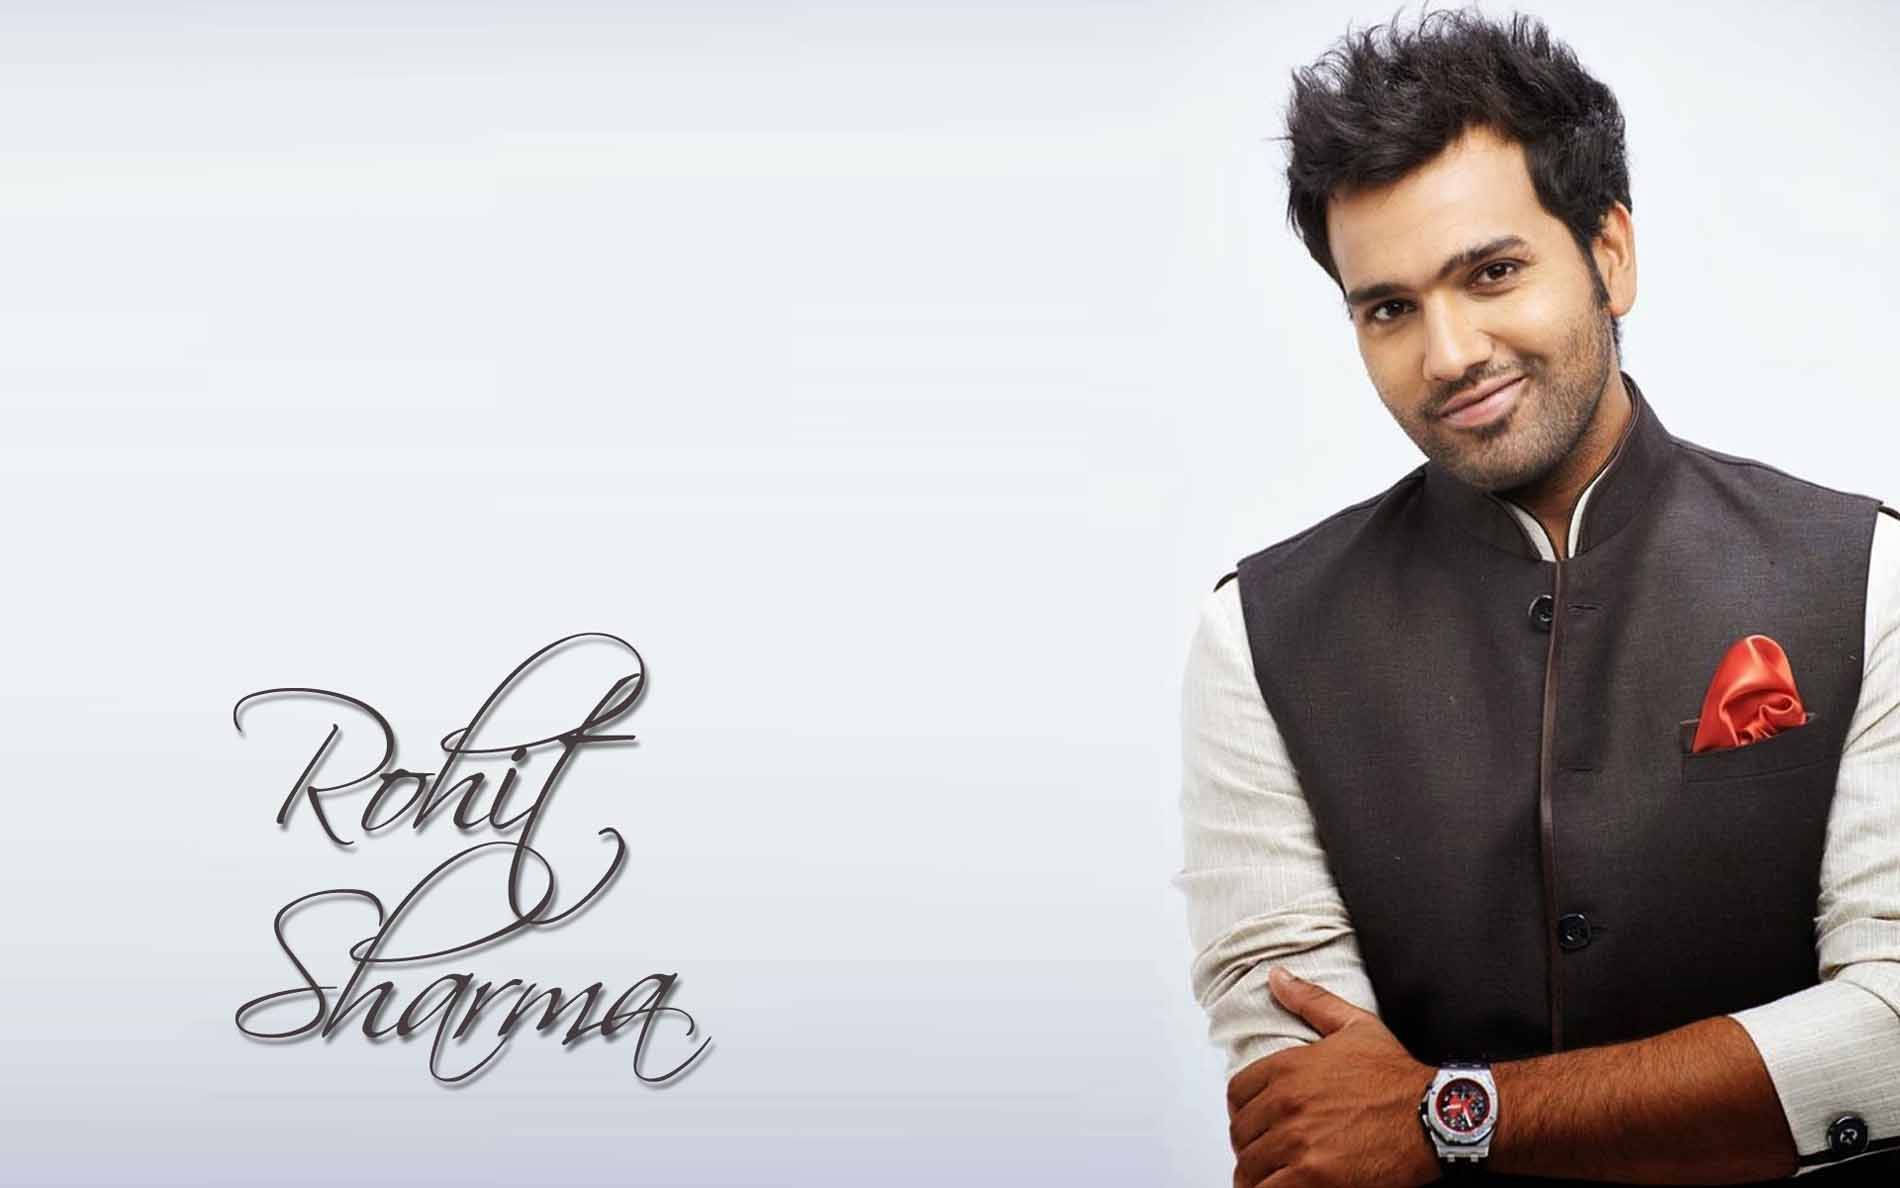 Stylish Rohit Sharma In Formal Suit Background